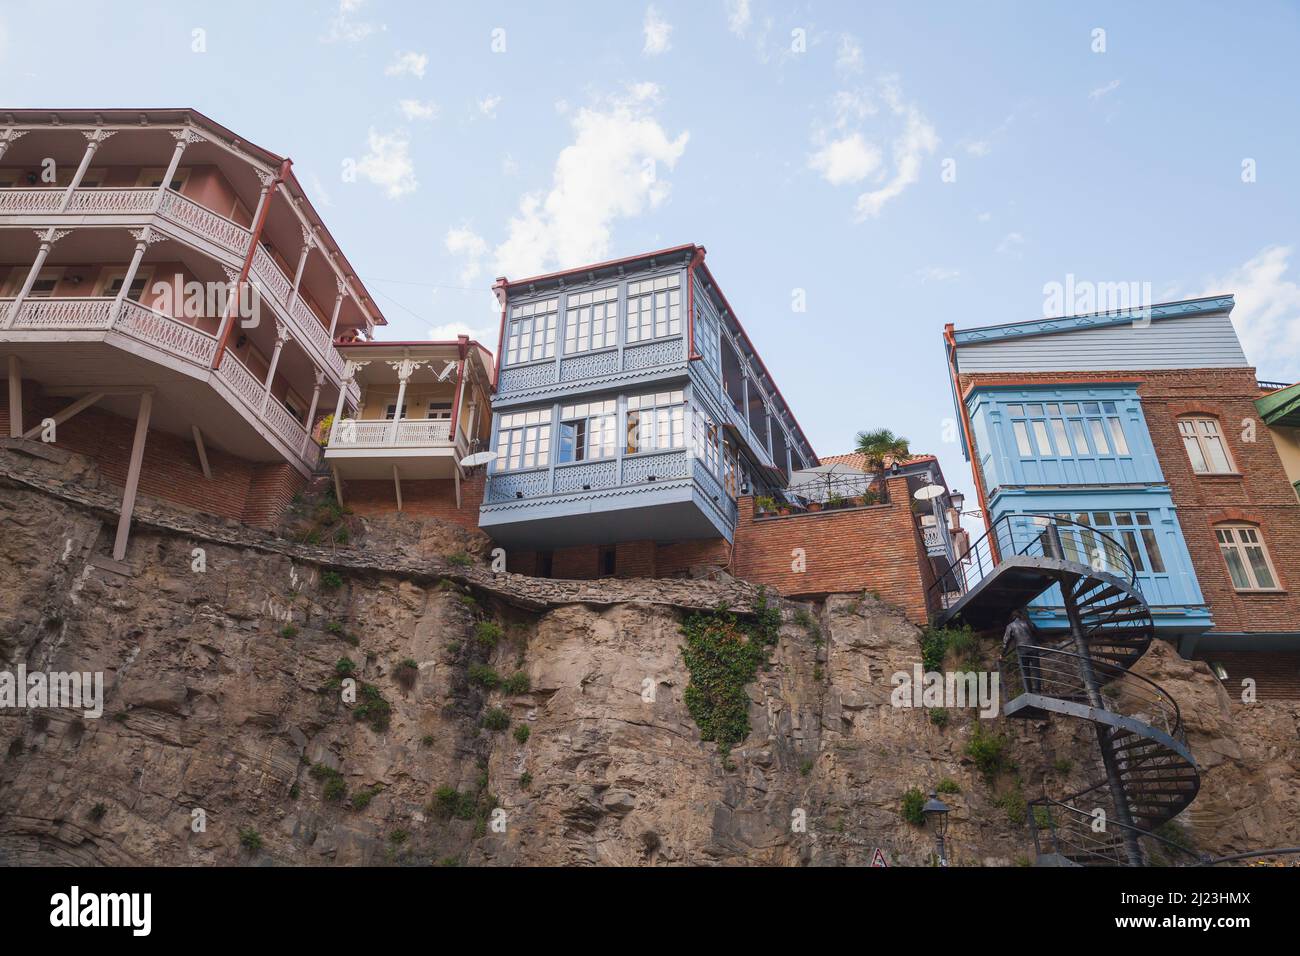 Old Tbilisi view, the Leghvtakhevi Canyon with old wooden houses on rocks. Georgia Stock Photo